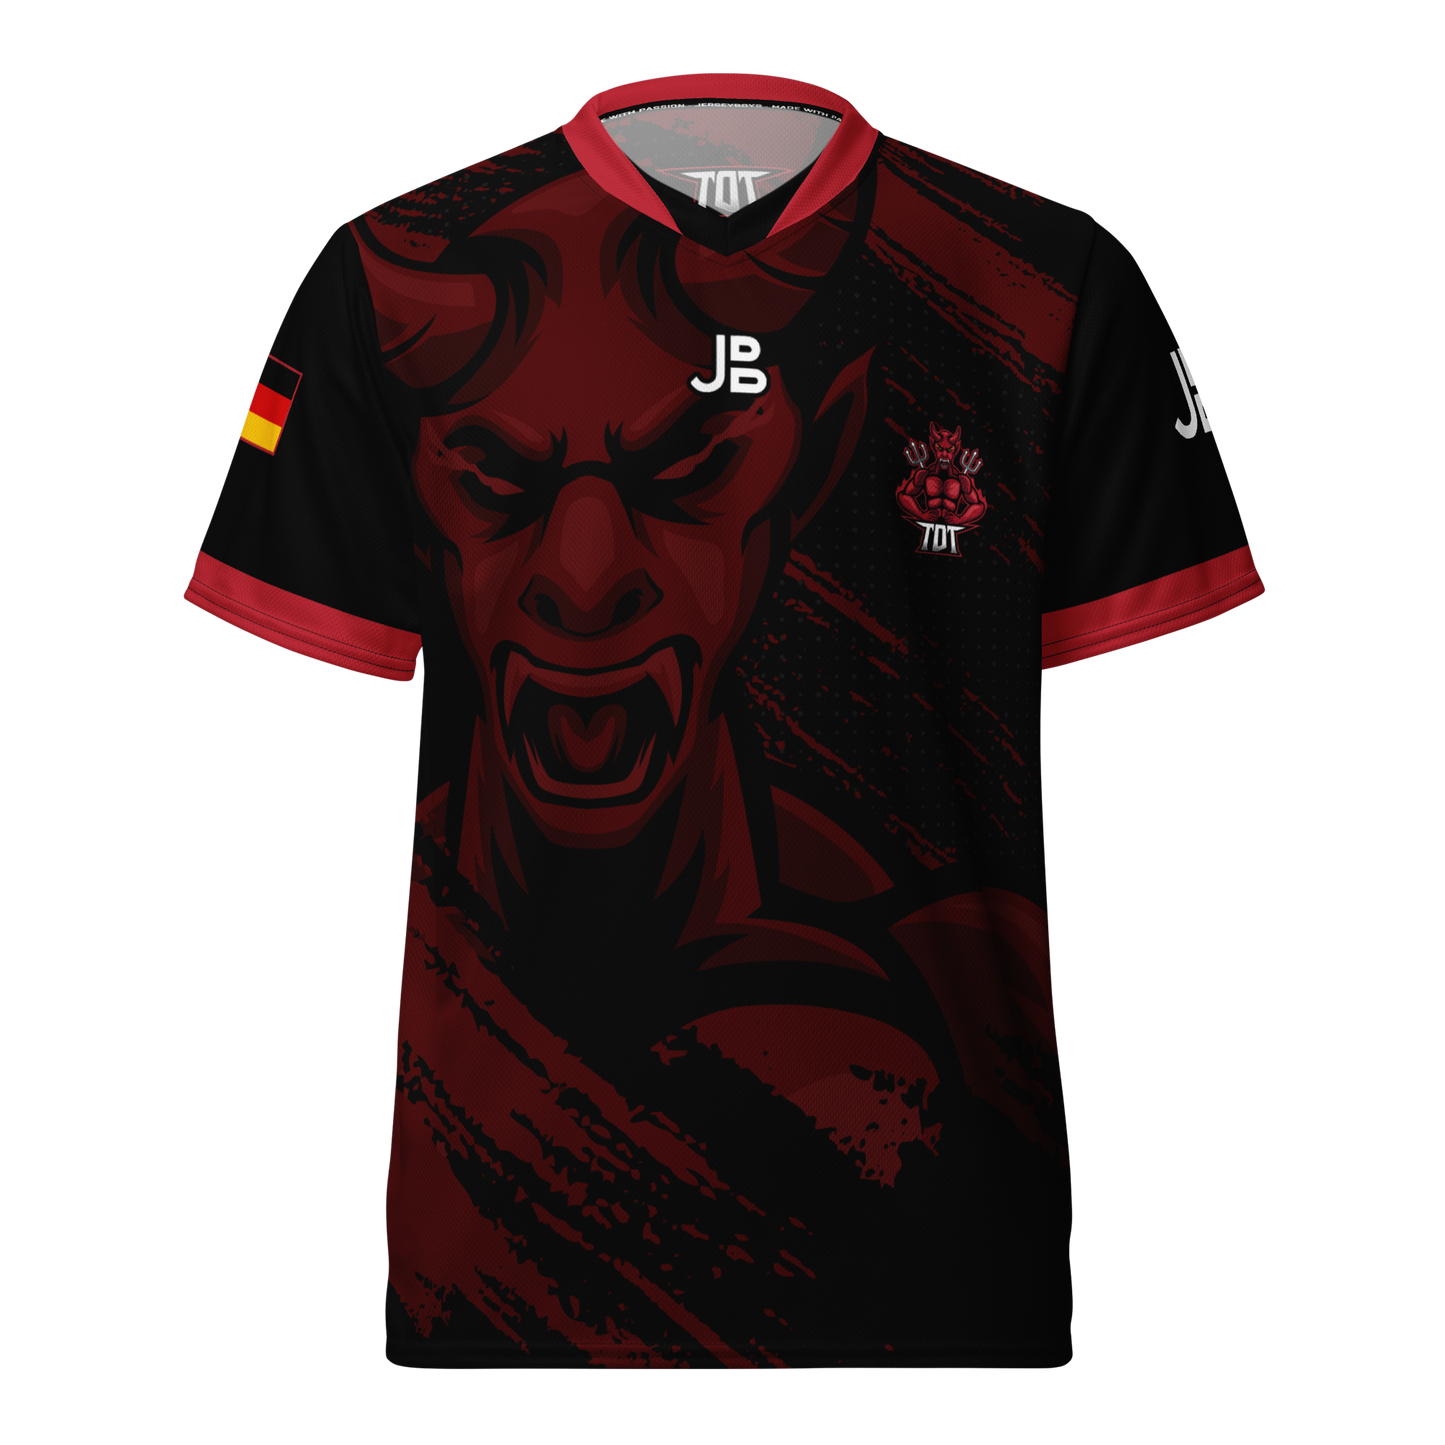 THE DEVILS TRIBE - Jersey 2022